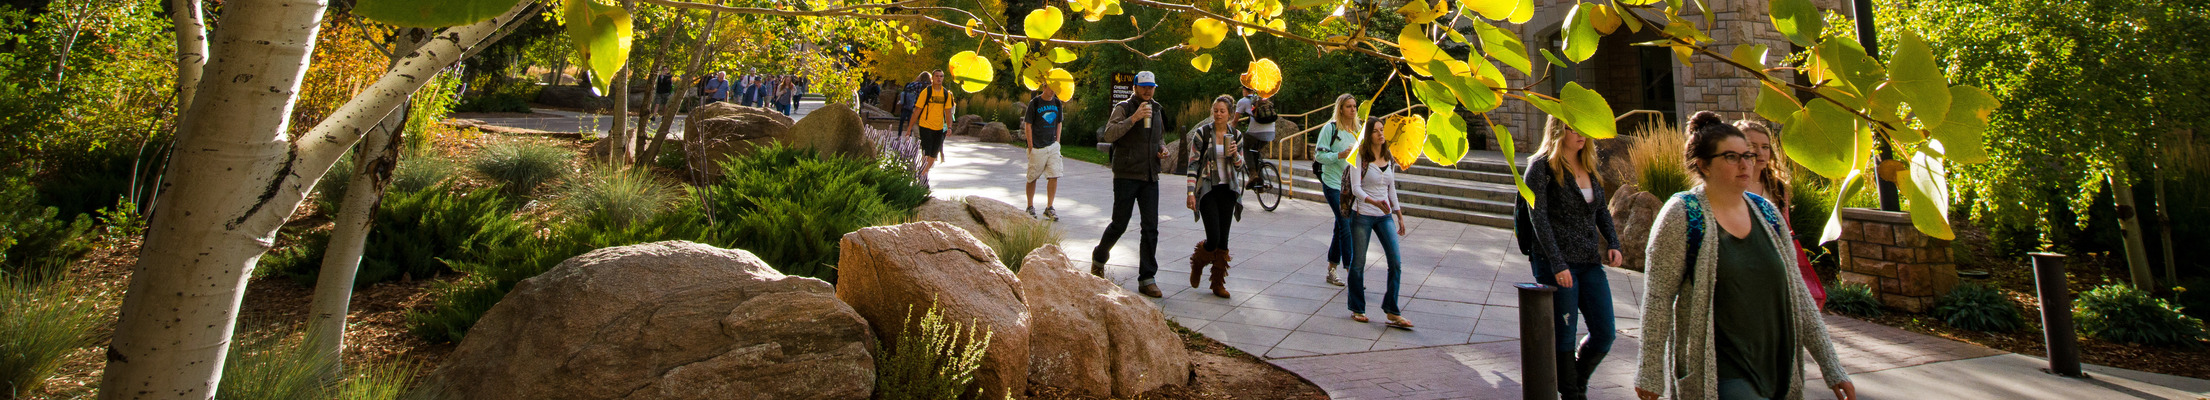 students walking through campus surrounded by autumn leaves 